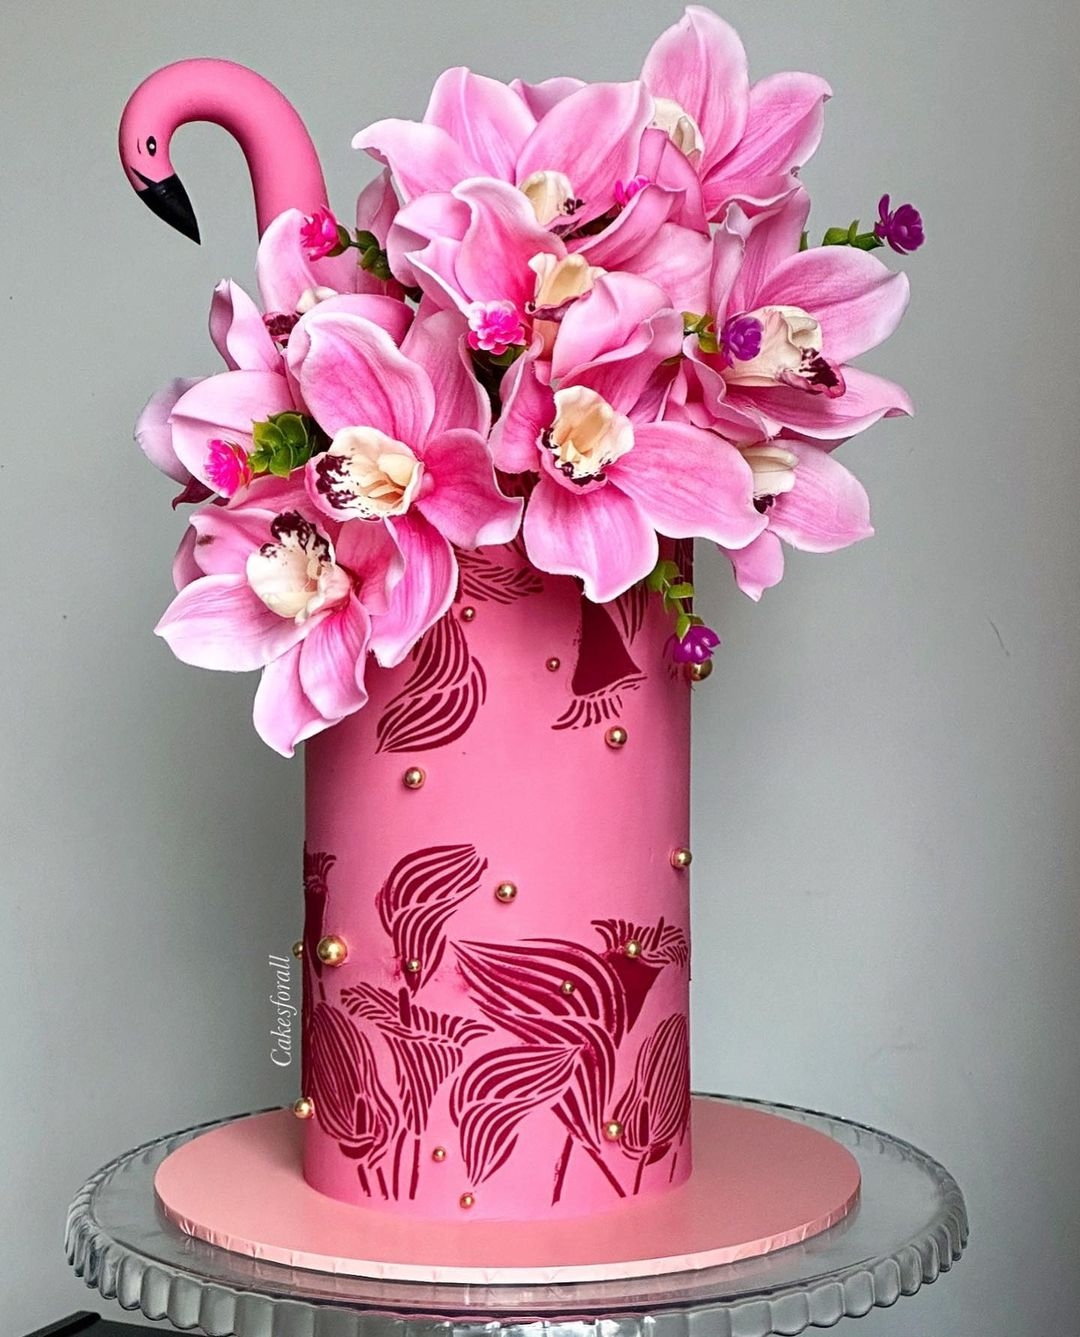 The best cake designs on Instagram today